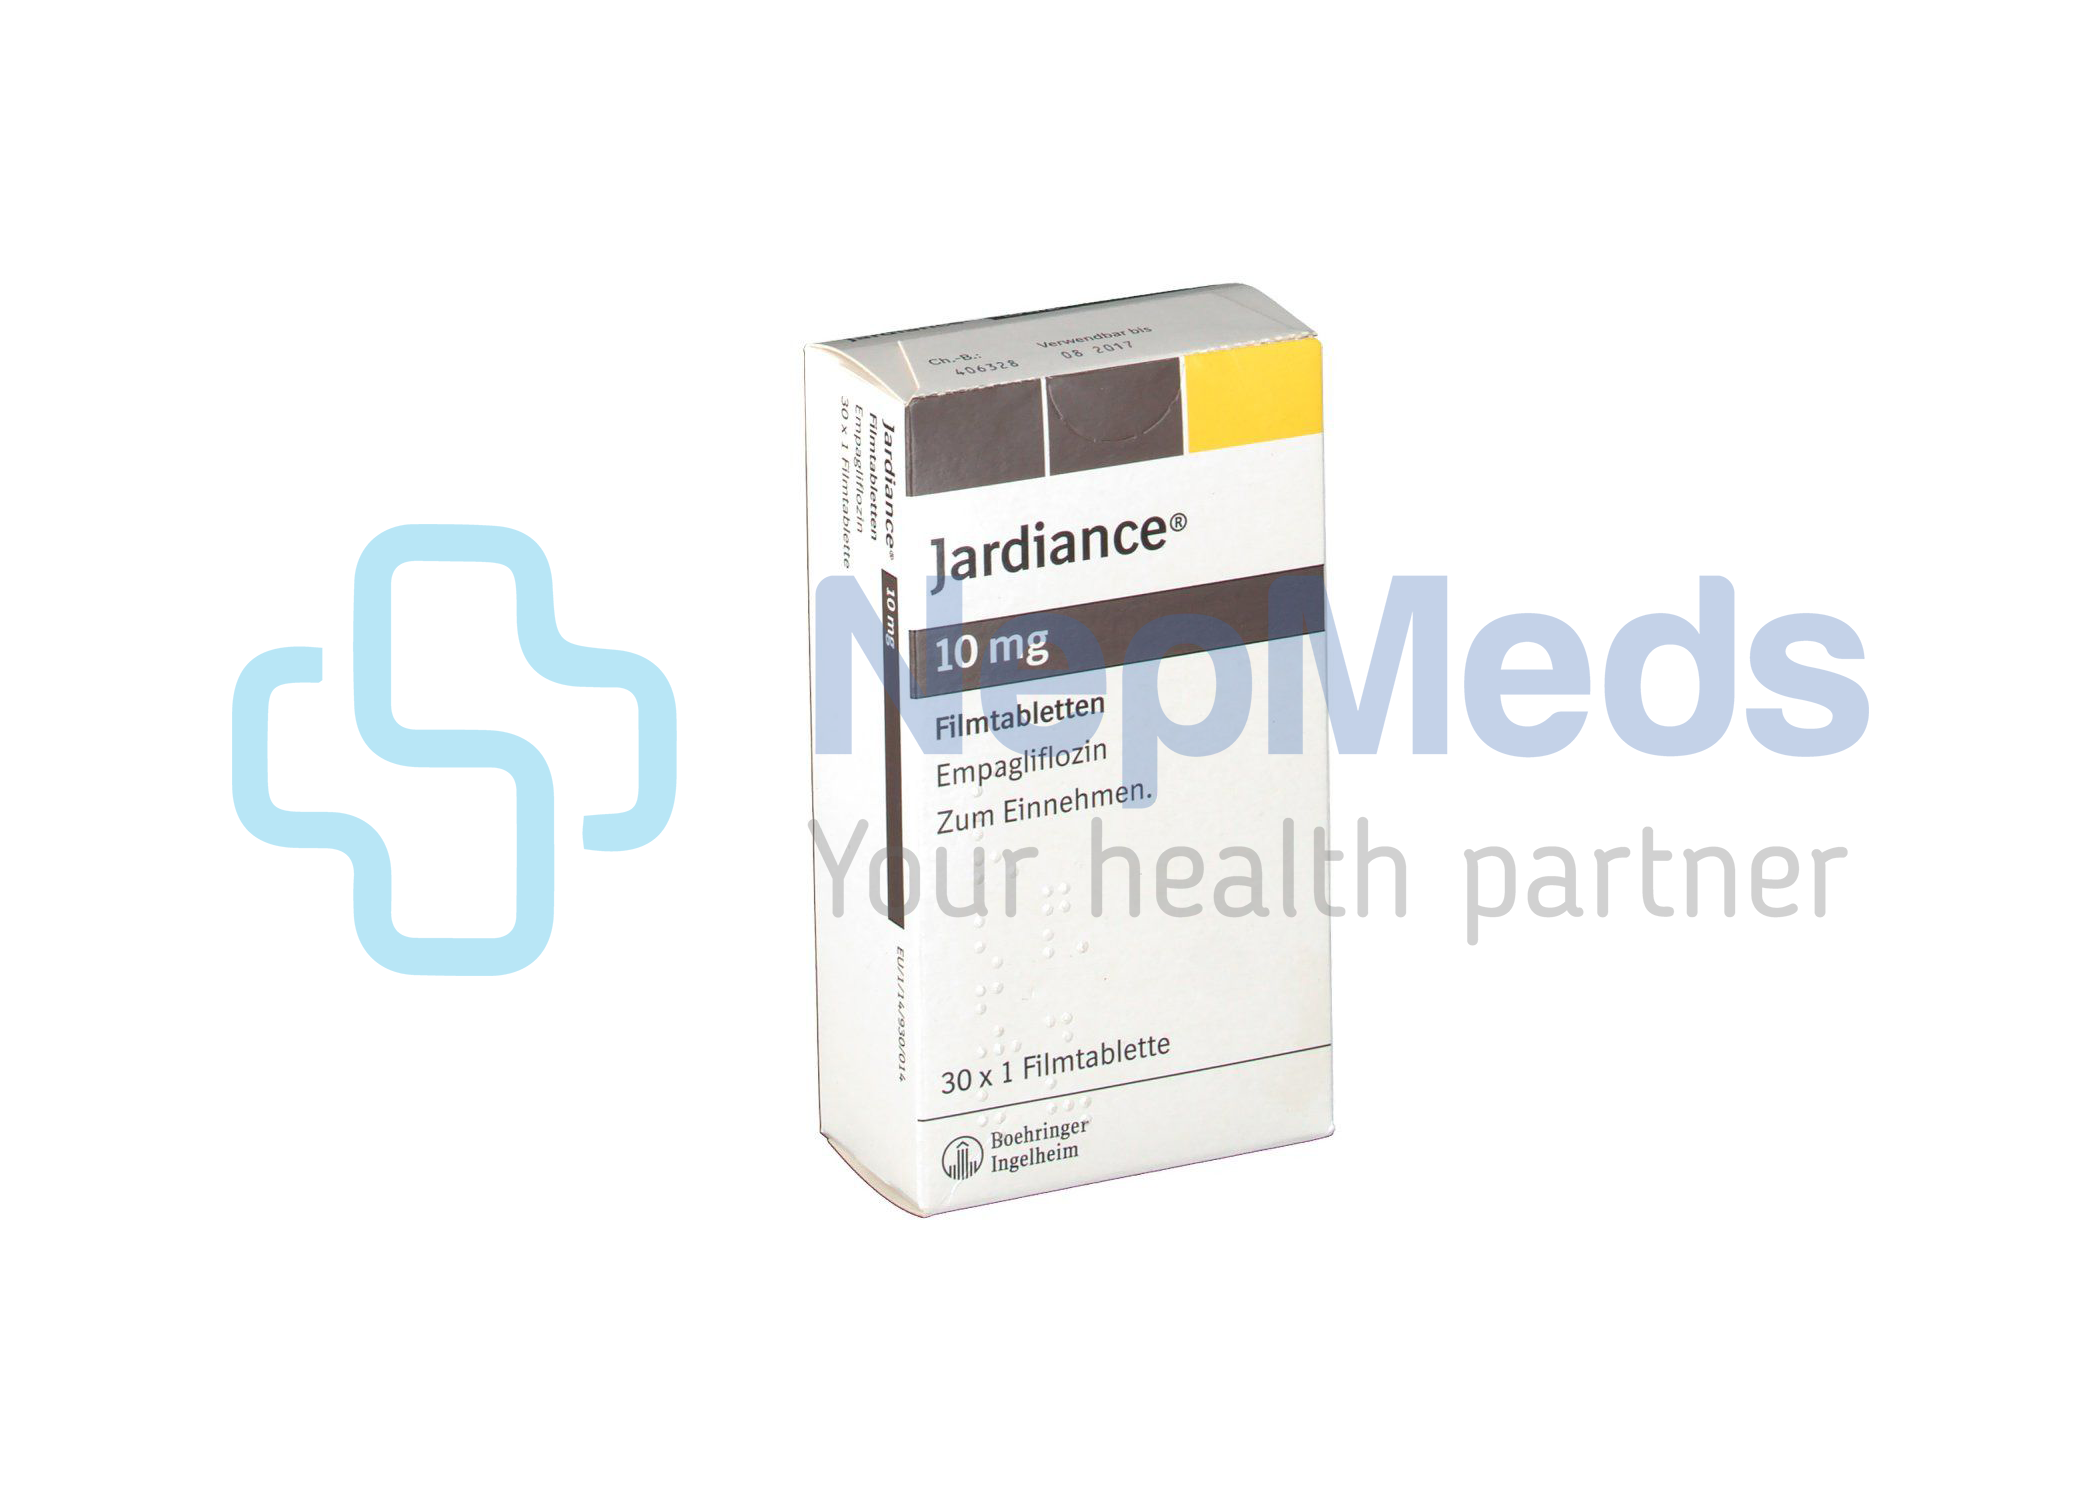 Jardiance-10mg - Buy Jardiance-10mg at Best Price in NepMeds